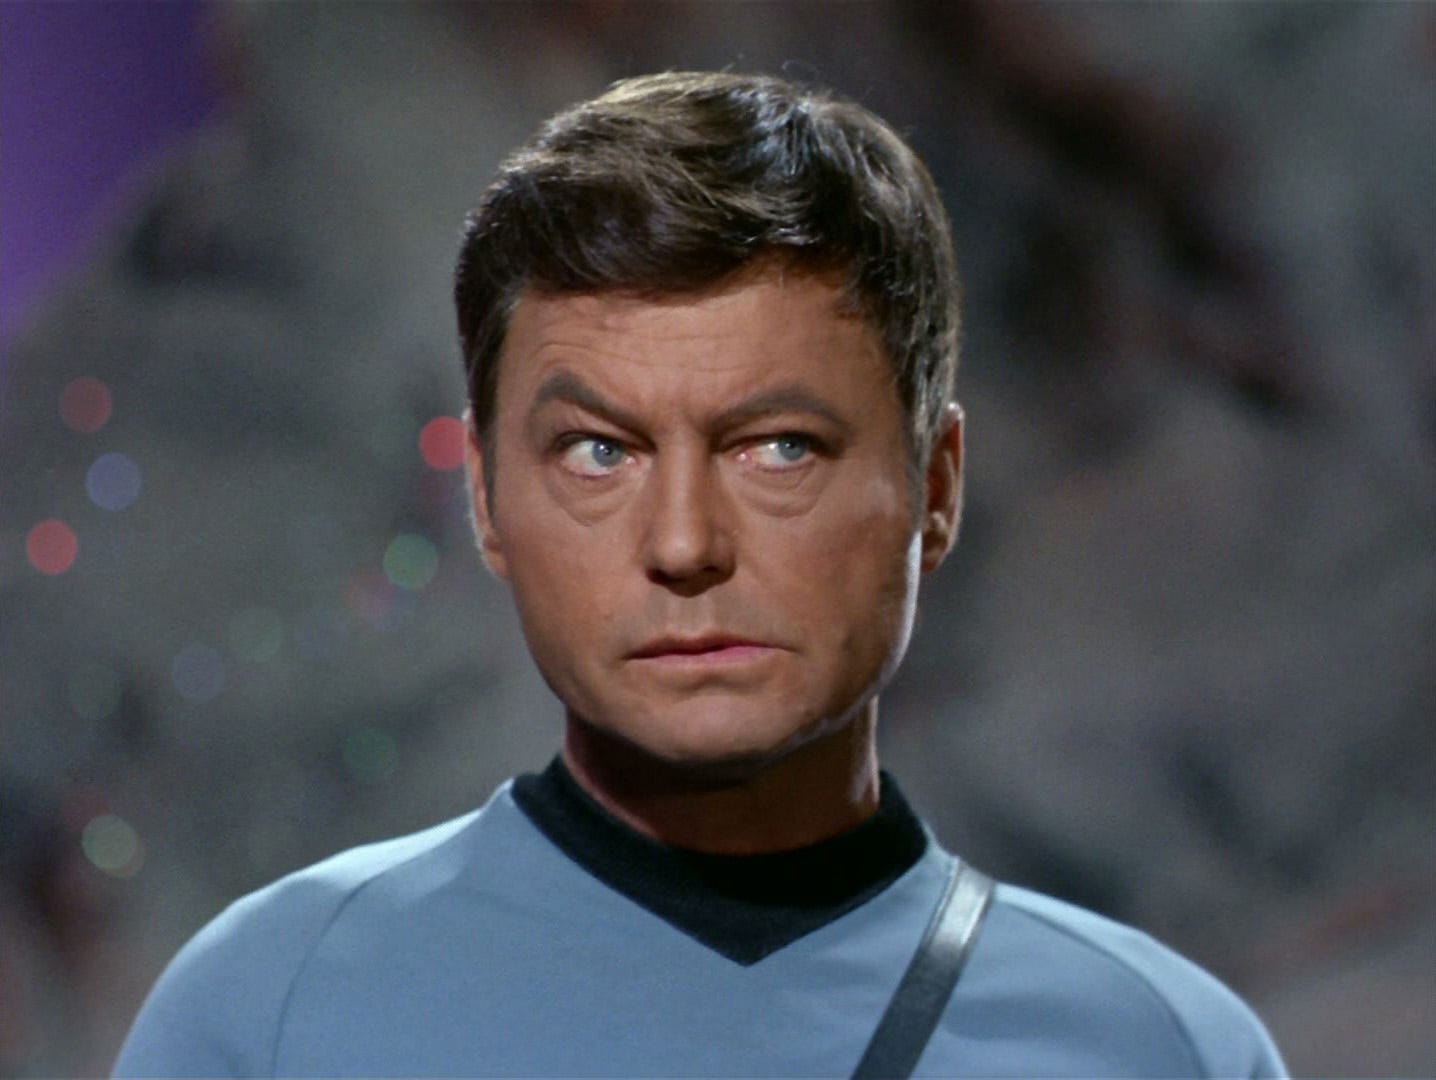 Dr. McCoy looking like his considering changing his mind